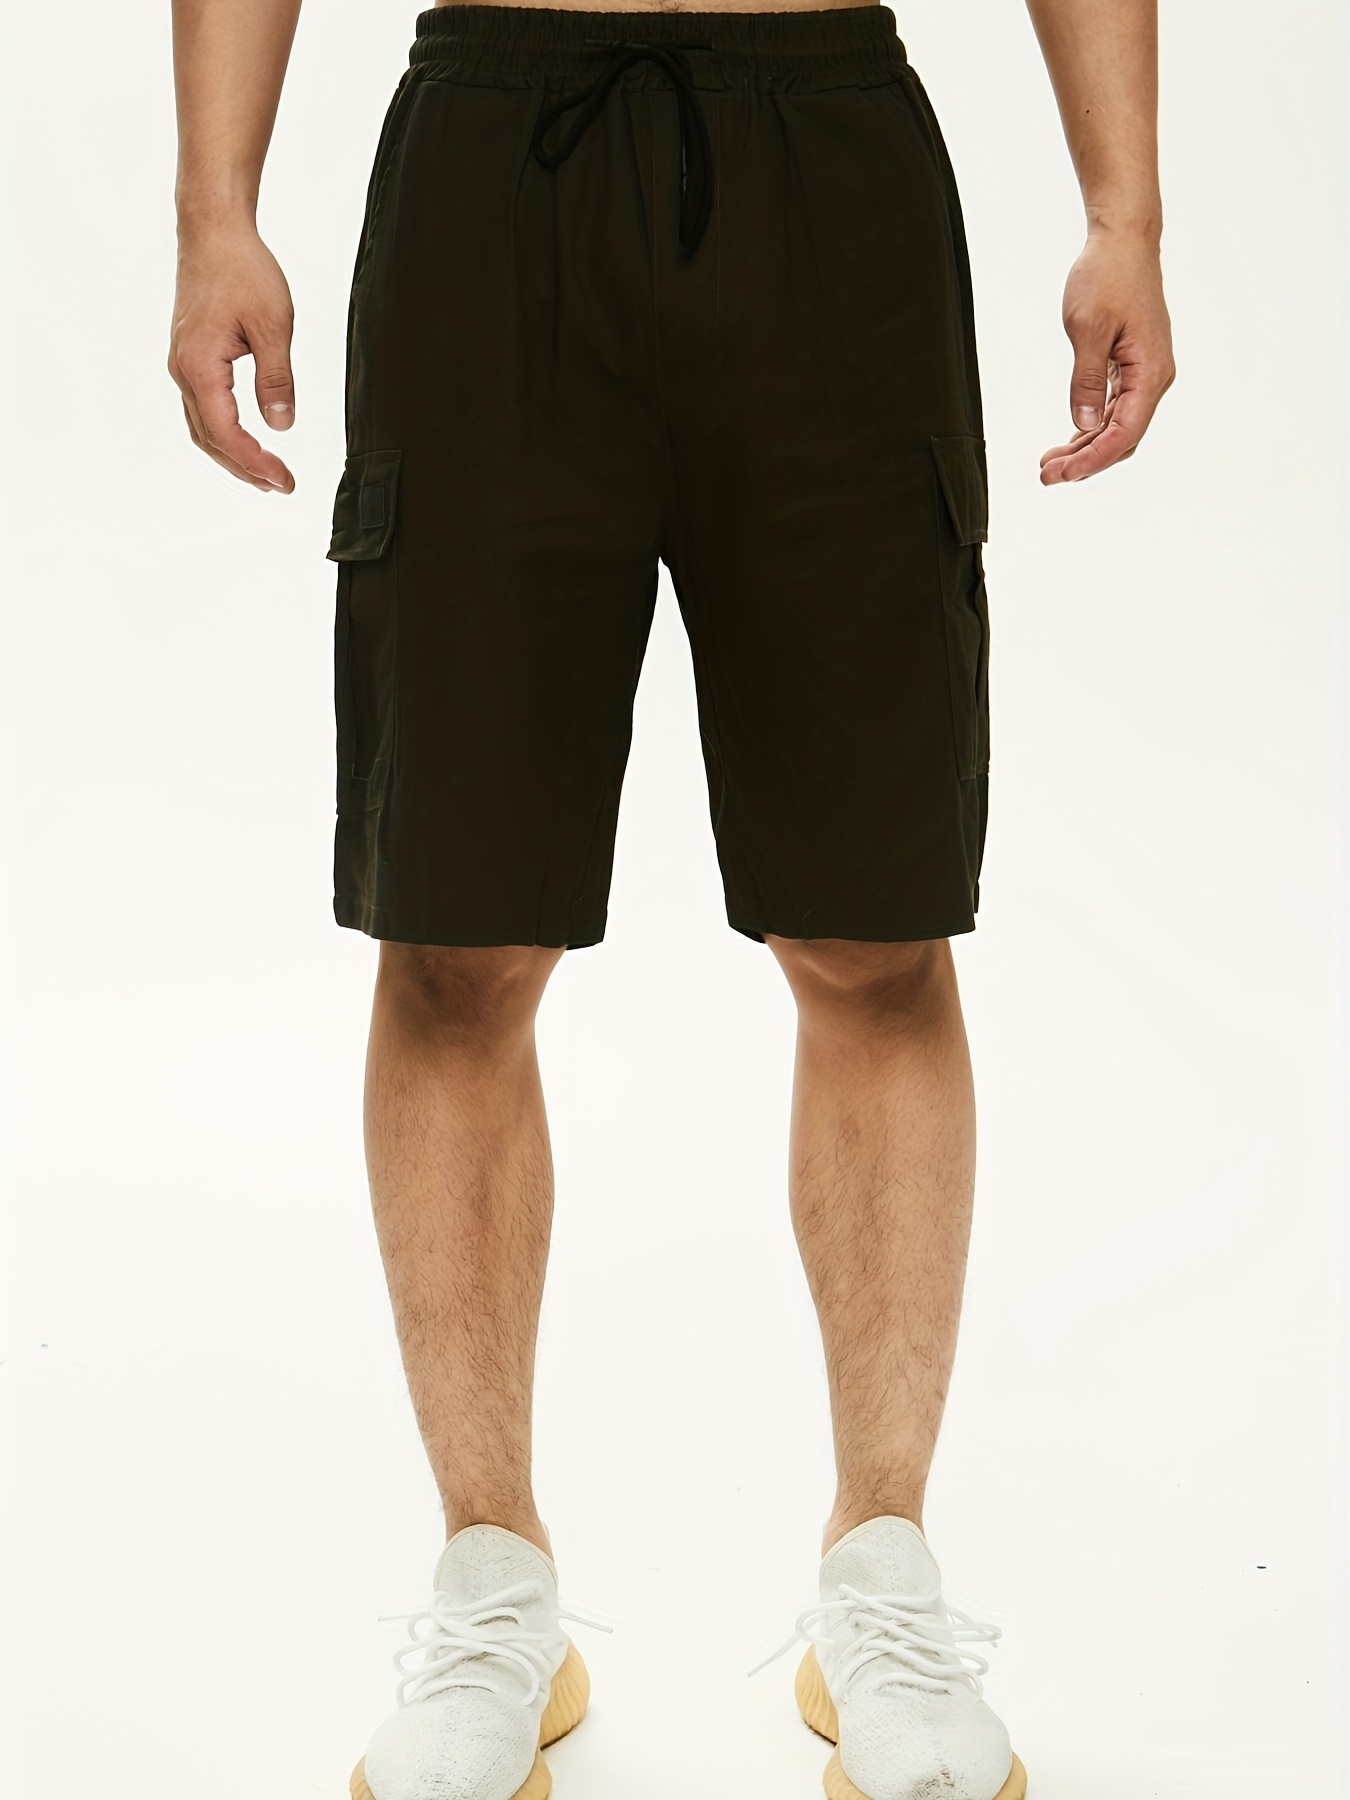 Designer Cotton Board Shorts With Pockets For Men And Women Loose Fit And  Comfortable Sports Pants In Large Sizes S 3XL From Zhangweiru, $25.59